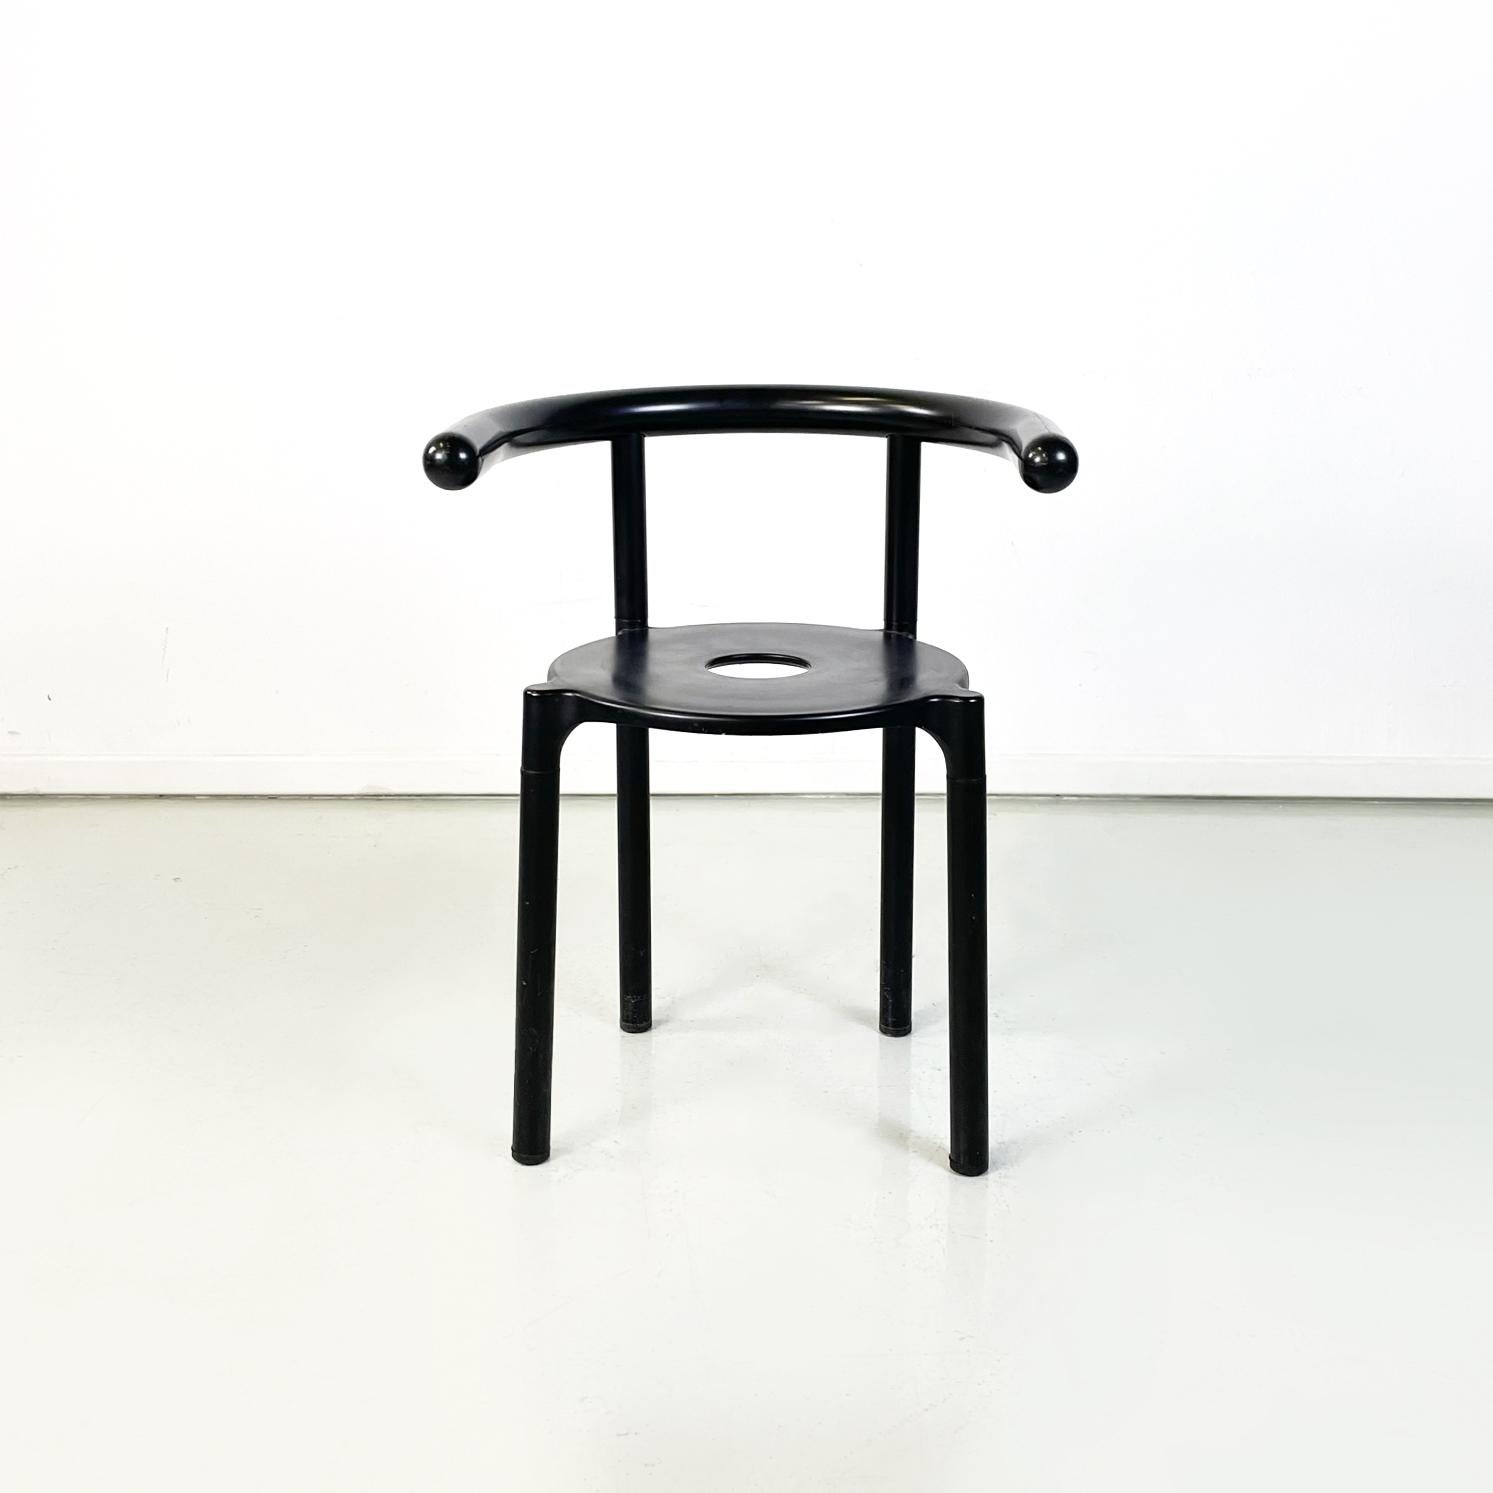 Italian modern Black metal plastic Chairs 4855 by Anna Castelli Kartell, 1990s
Set of 12 dining room chairs mod. 4855 with round seat with a hole in the centre, in plastic and black metal. The cockpit-shaped structure has curved armrests with a